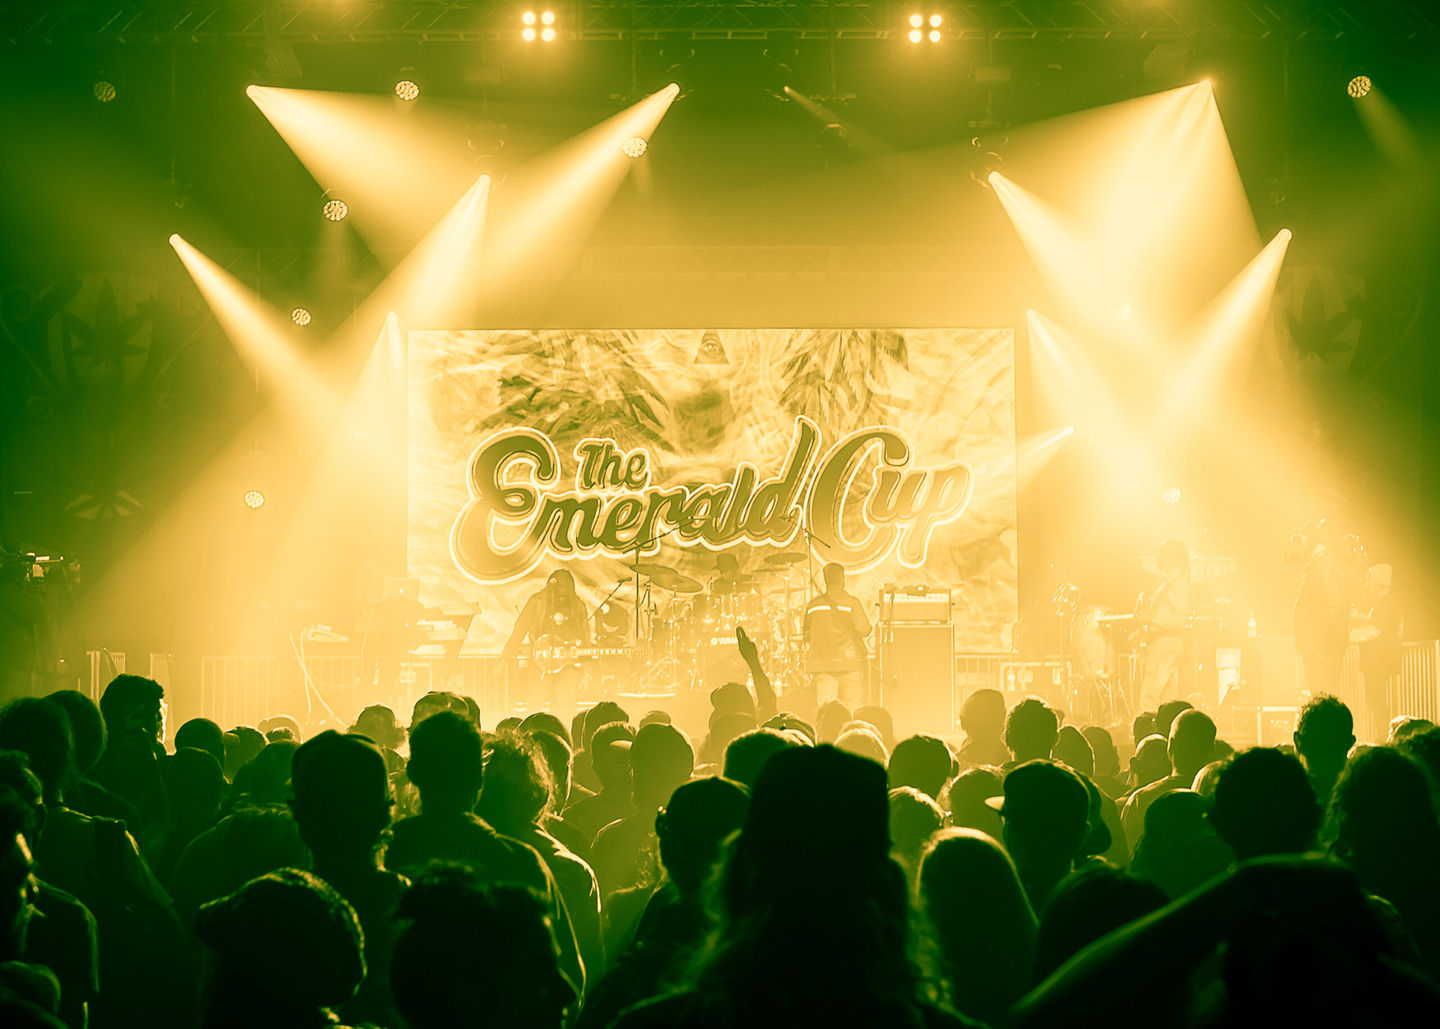 Emerald Cup returns in person with Harvest Ball Leaf Nation